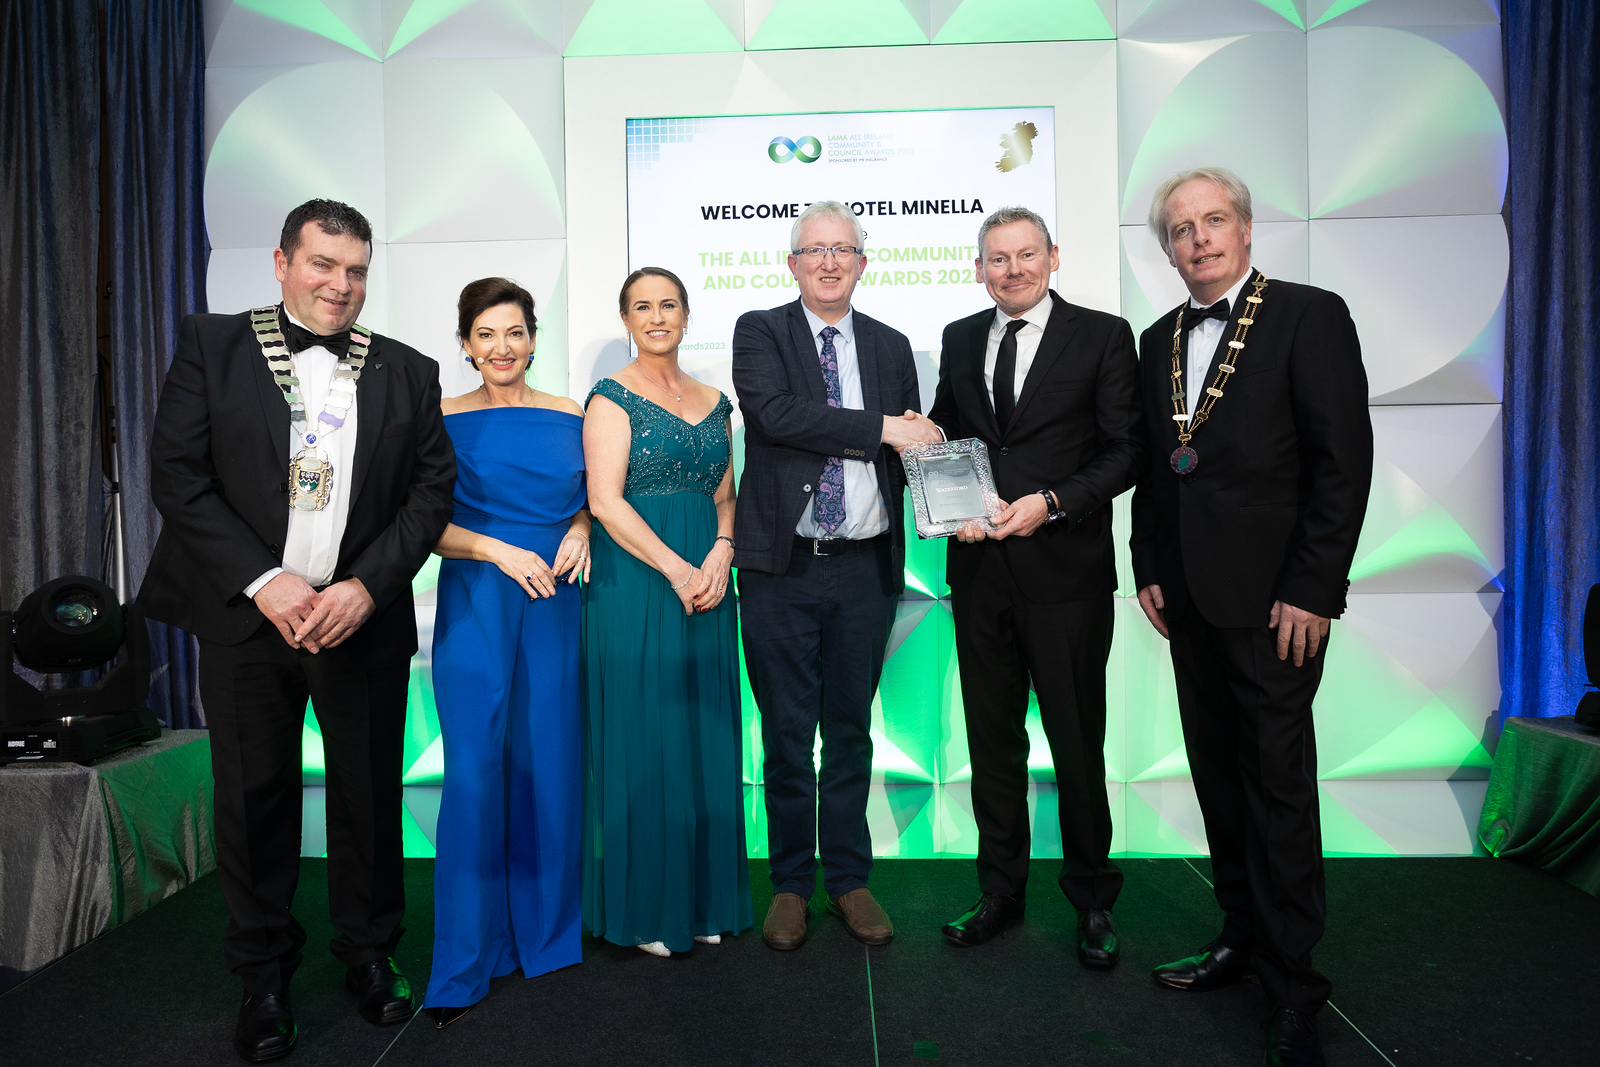 Arklow Based Company Crowned 'Best Micro-Start-Up' in Prestigious National Awards